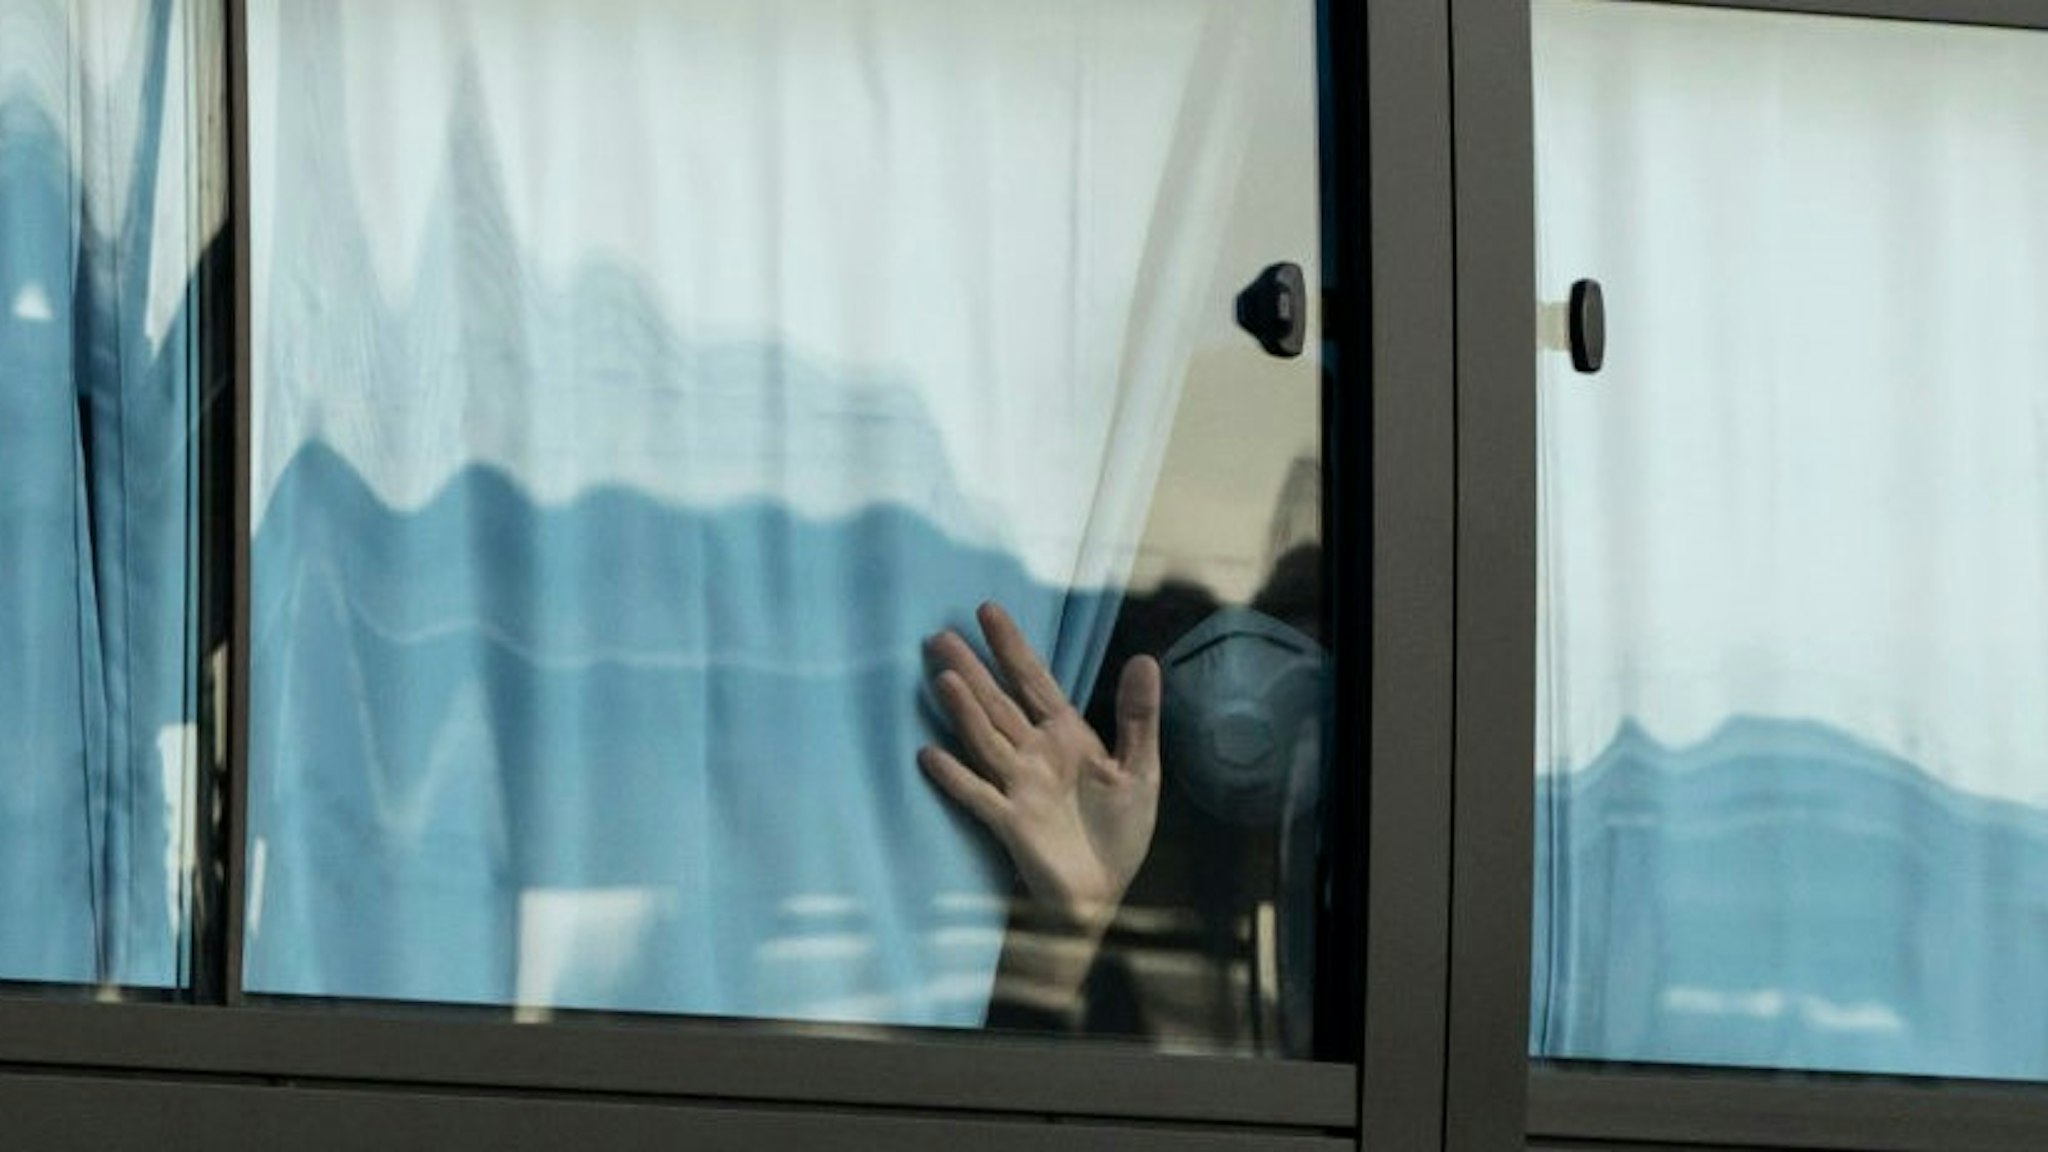 YOKOHAMA, JAPAN - FEBRUARY 19: A man waves from a bus carrying passengers who disembarked the quarantined Diamond Princess cruise ship as he leaves the Daikoku Pier on February 19, 2020 in Yokohama, Japan. About 500 passengers who have tested negative for the coronavirus (COVID-19) were allowed to disembark the cruise ship on Wednesday after 14 days quarantine period as at least 542 passengers and crew onboard have tested positive for the coronavirus. Including cases onboard the ship, 615 people in Japan have now been diagnosed with COVID-19 making it the worst affected country outside of China. (Photo by